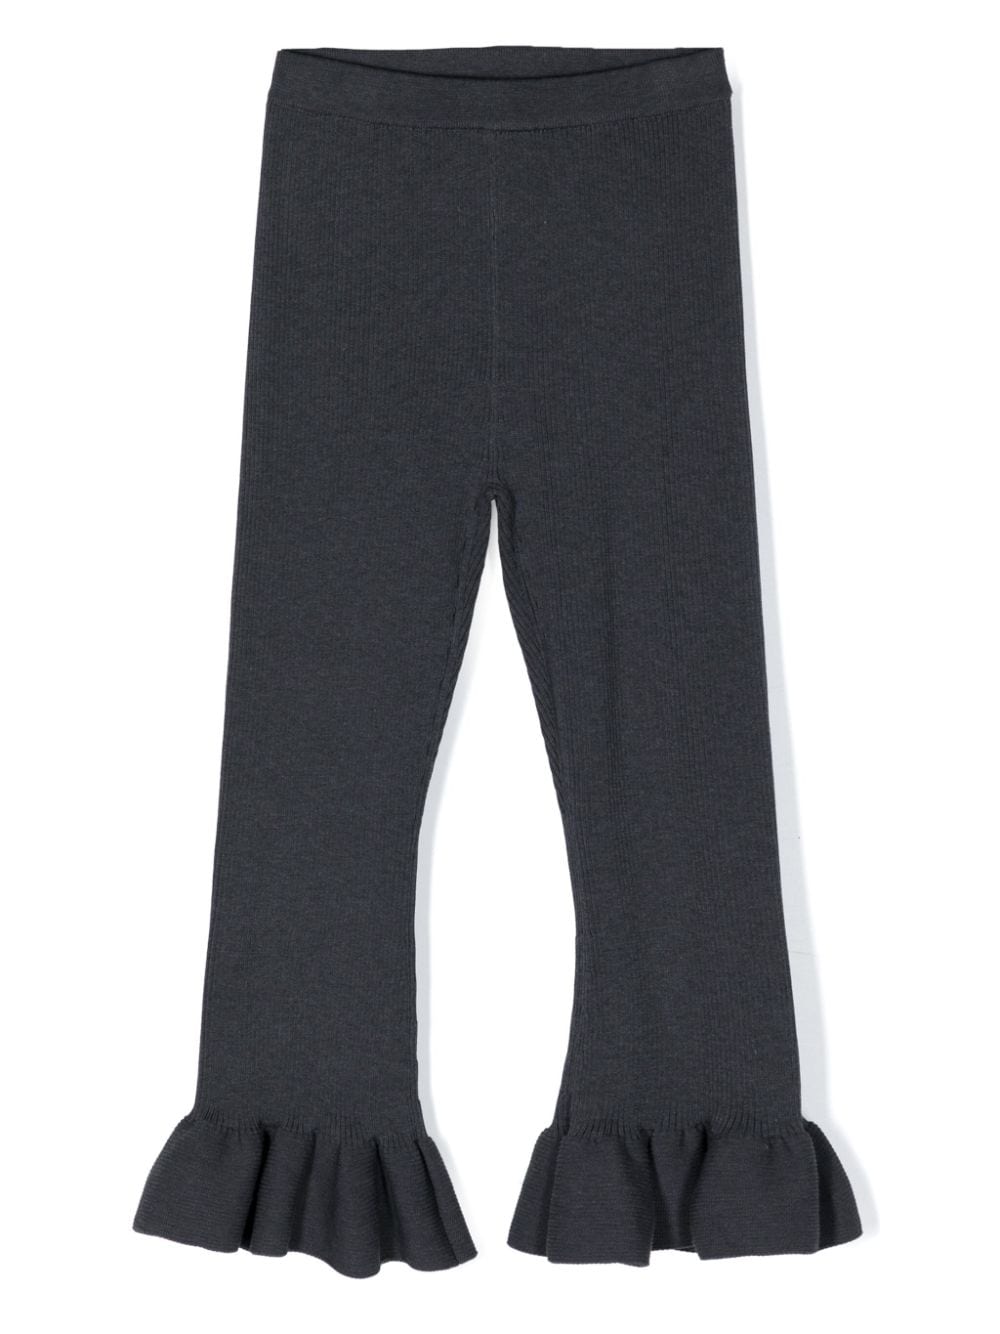 jnby by JNBY ruffled knitted trousers - Grey von jnby by JNBY